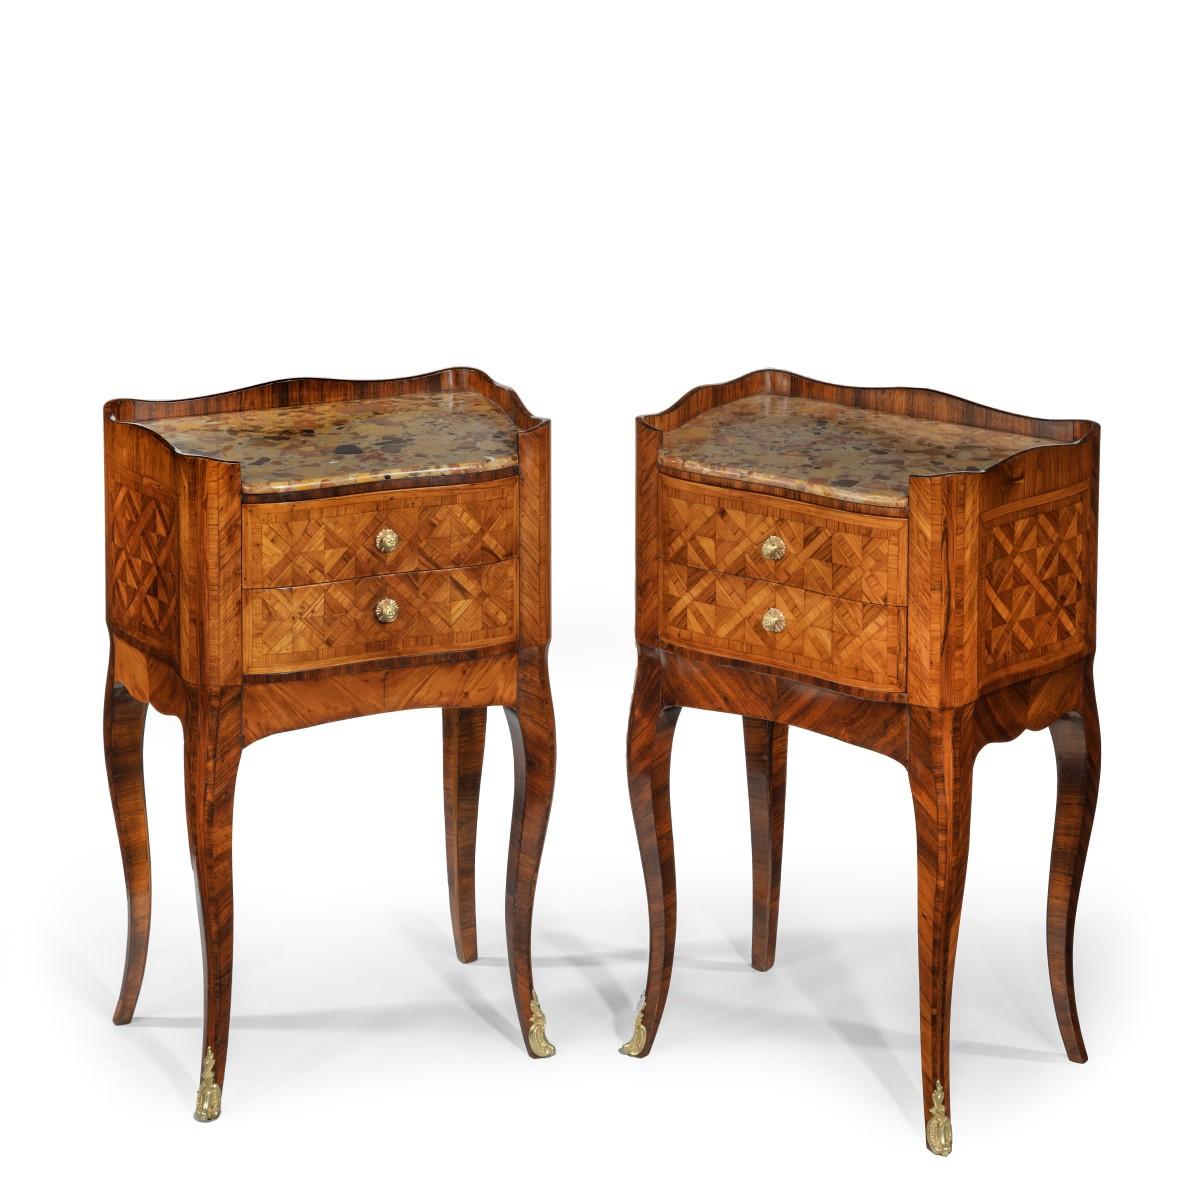 A pair of freestanding French kingwood bedside cabinets, each of bombe, serpentine form with a marble top above two small drawers, with flowerhead handles, decorated throughout with cube trellis and cross banding. French, circa 1900.